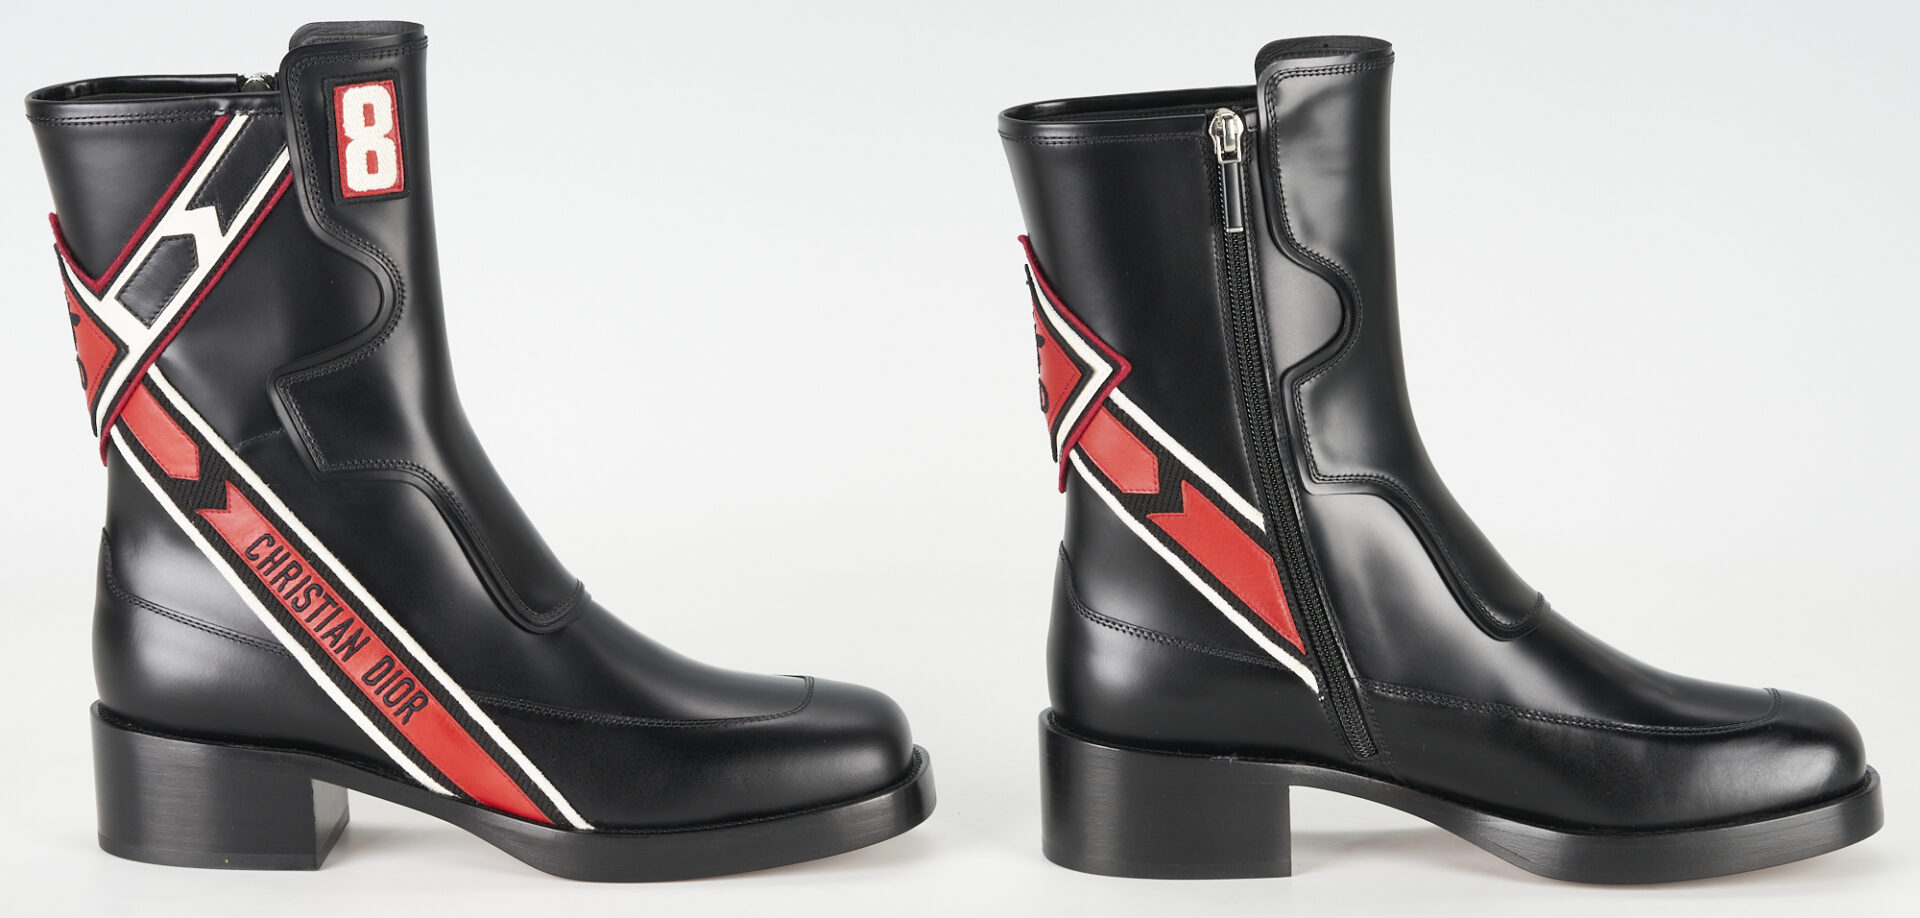 Lot 106: 2 Christian Dior Leather Boots, Diorally & Diorcamp